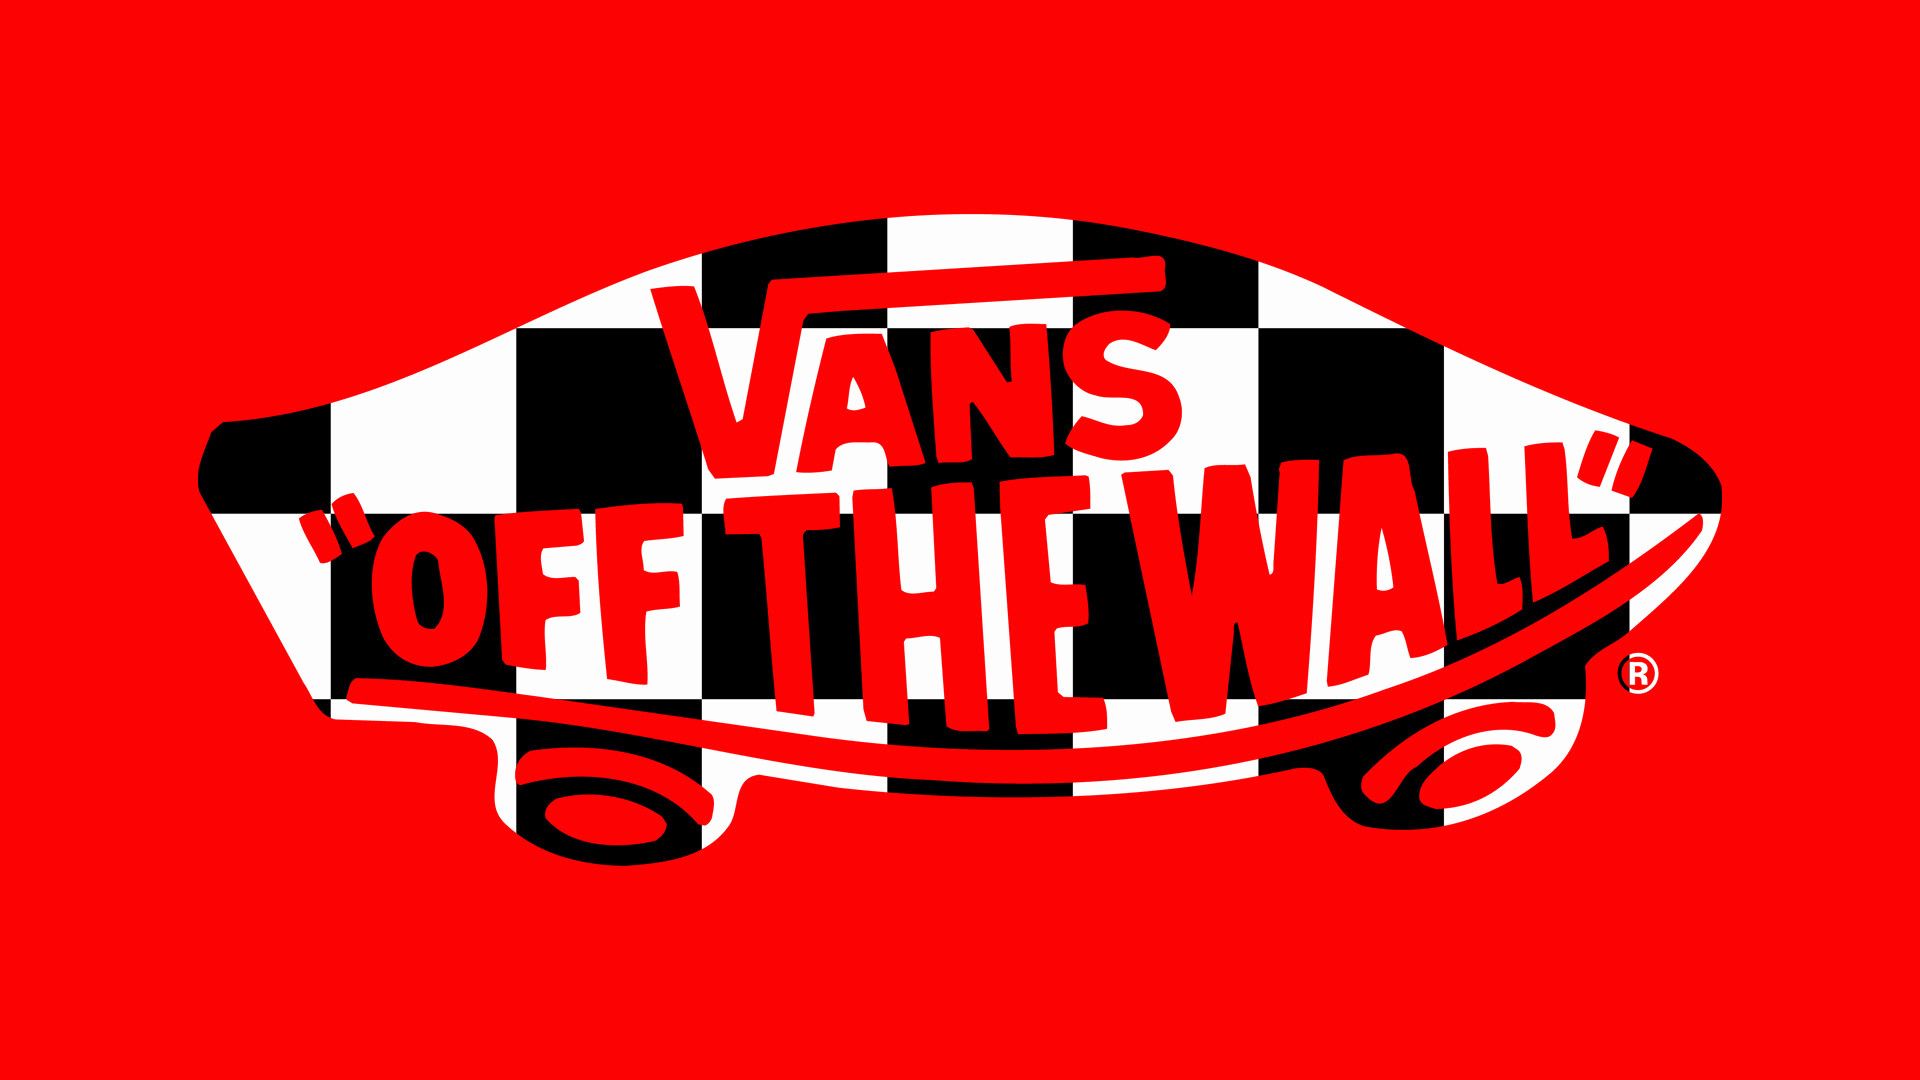 Vans Off The Wall Wallpaper background picture